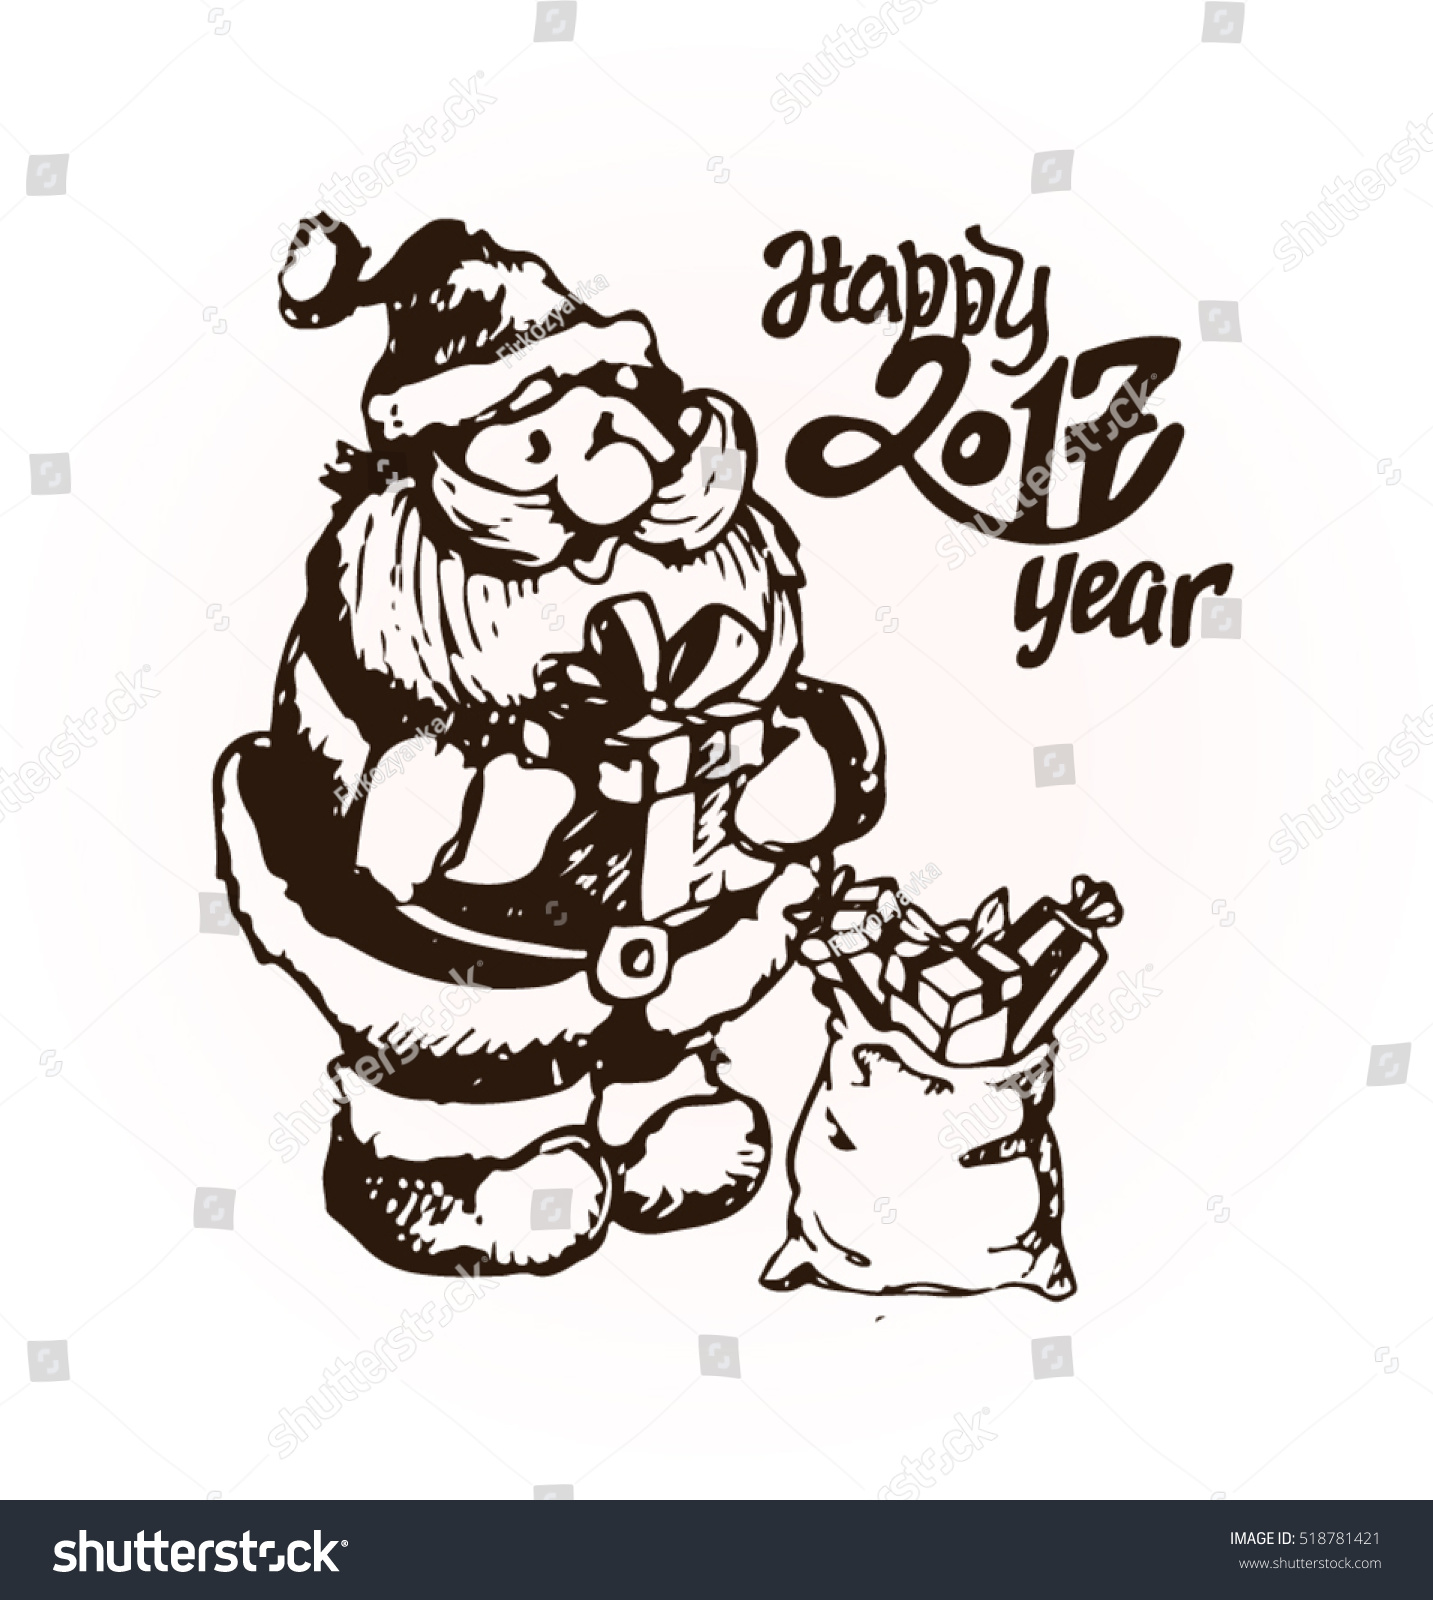 Christmas and New Year illustration Doodle funny Santa Claus Happy new year Merry Christmas